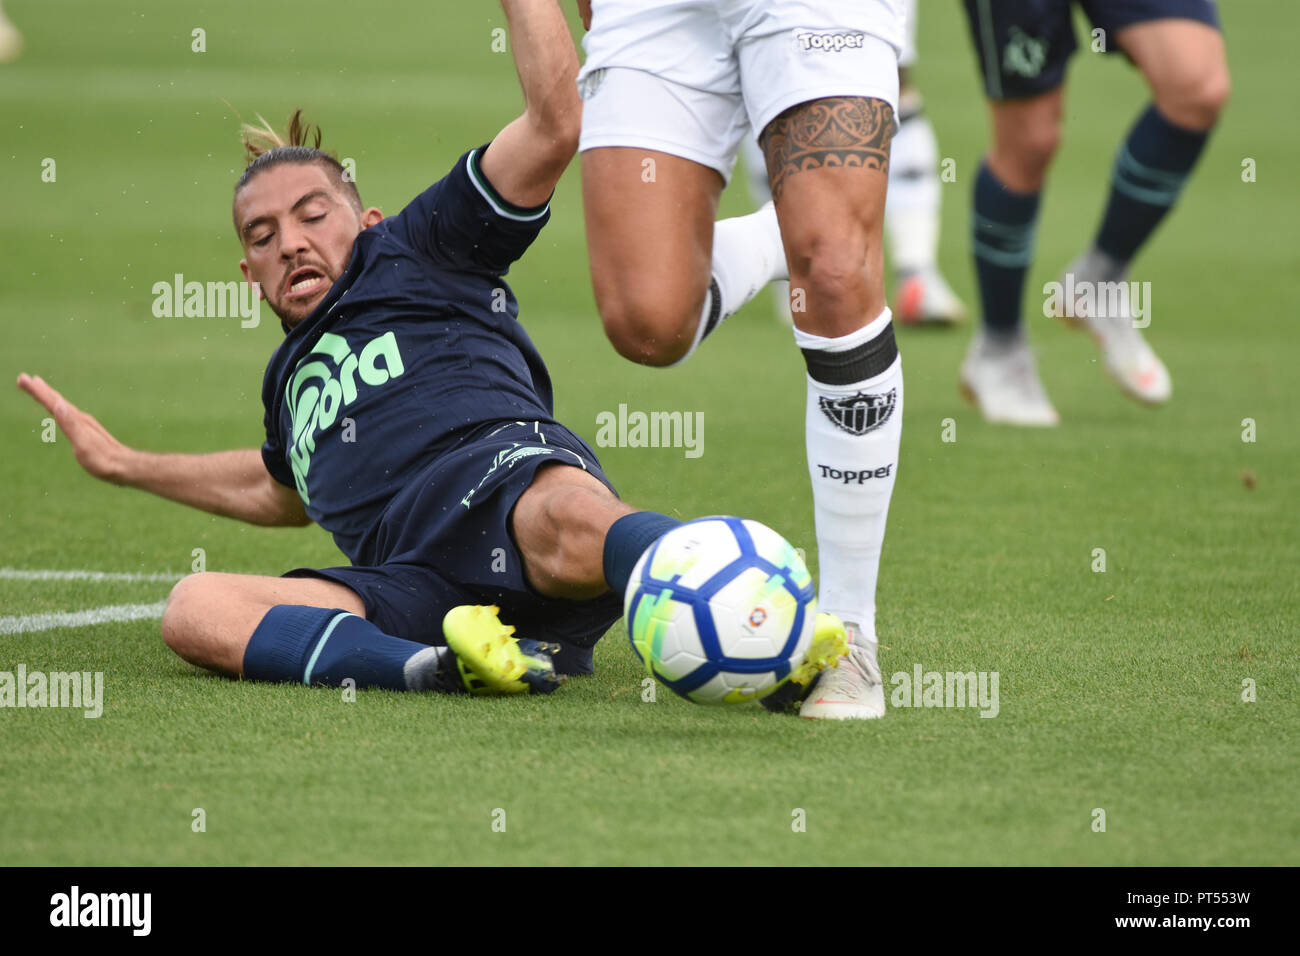 Chapeco, Brazil. 7th October 2018. SC - Chapeco - 06/10/2018 - BRAZILIAN CHAMPIONSHIP A 2018 Chapecoense x Atl tico-MG - Chapecoense player Diego Torres contests bid with Atletico-MG player during a match at the Arena Conda stadium for the Brazilian championship A 2018. Photo: Renato Padilha / AGIF Credit: AGIF/Alamy Live News Stock Photo